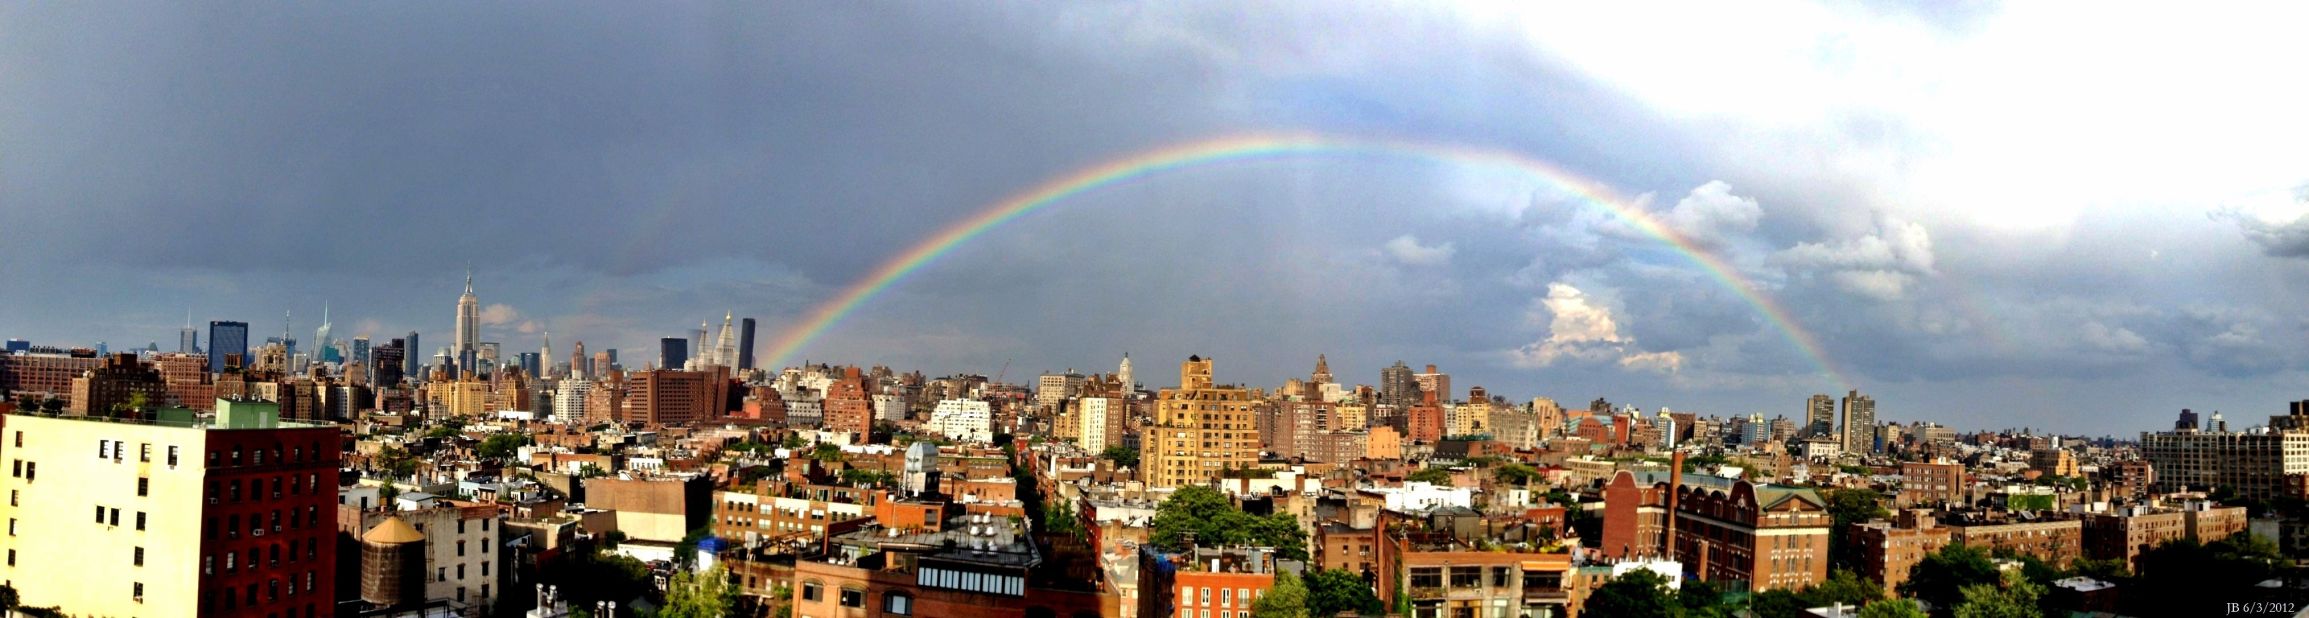 A full rainbow stretches over the city. This rare occurrence was captured by iReporter <a href="http://ireport.cnn.com/docs/DOC-800994">Jeffrey Berman</a>. 